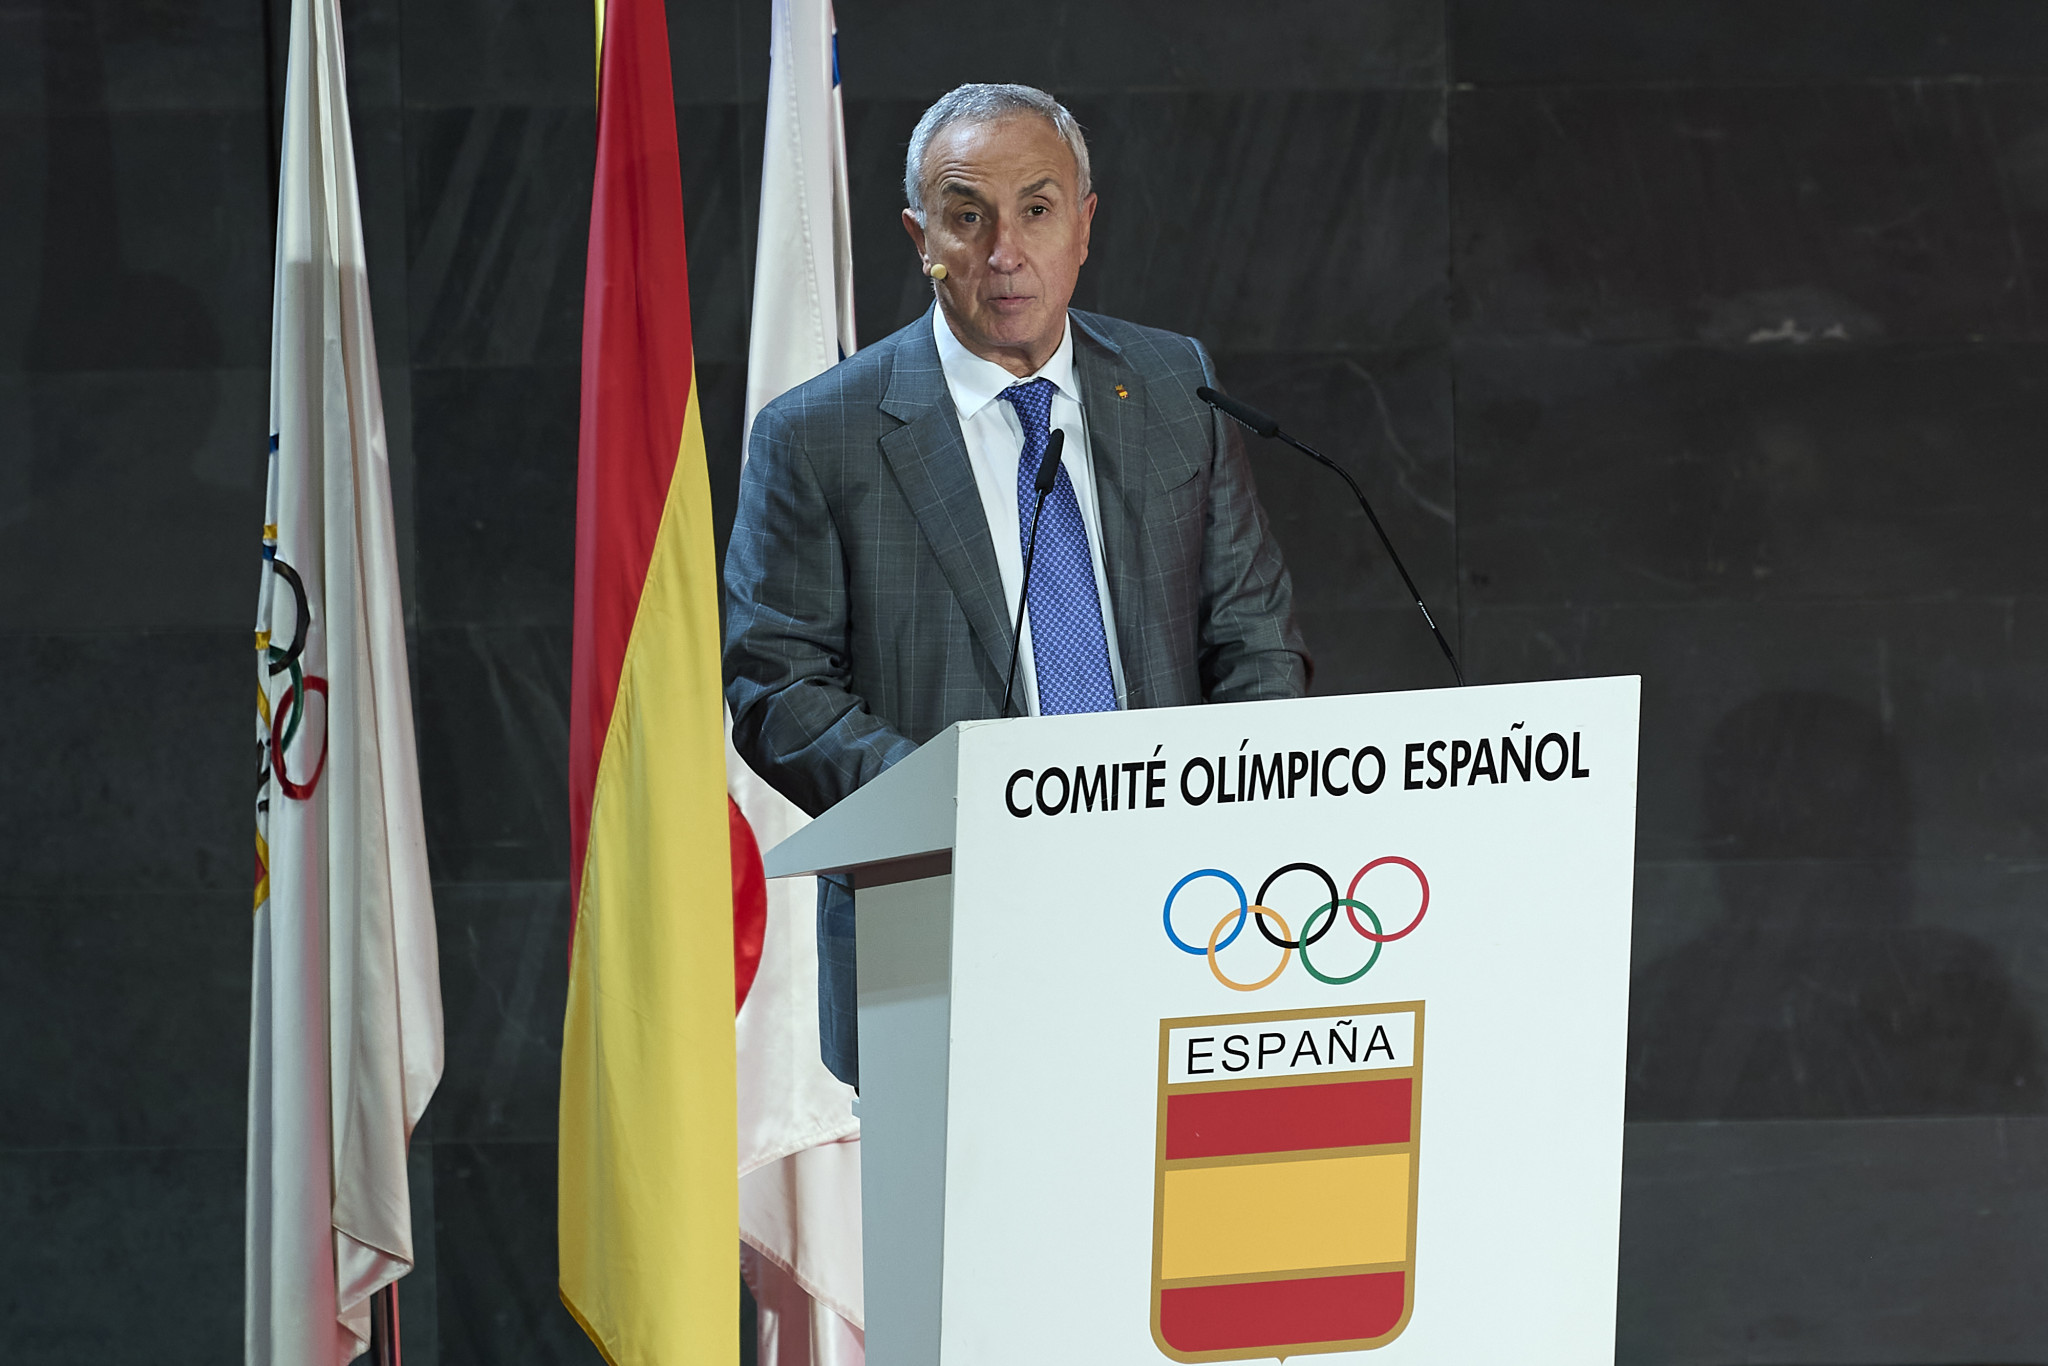 Spanish Olympic Committee President rules out Madrid bid to host 2036 Olympic Games